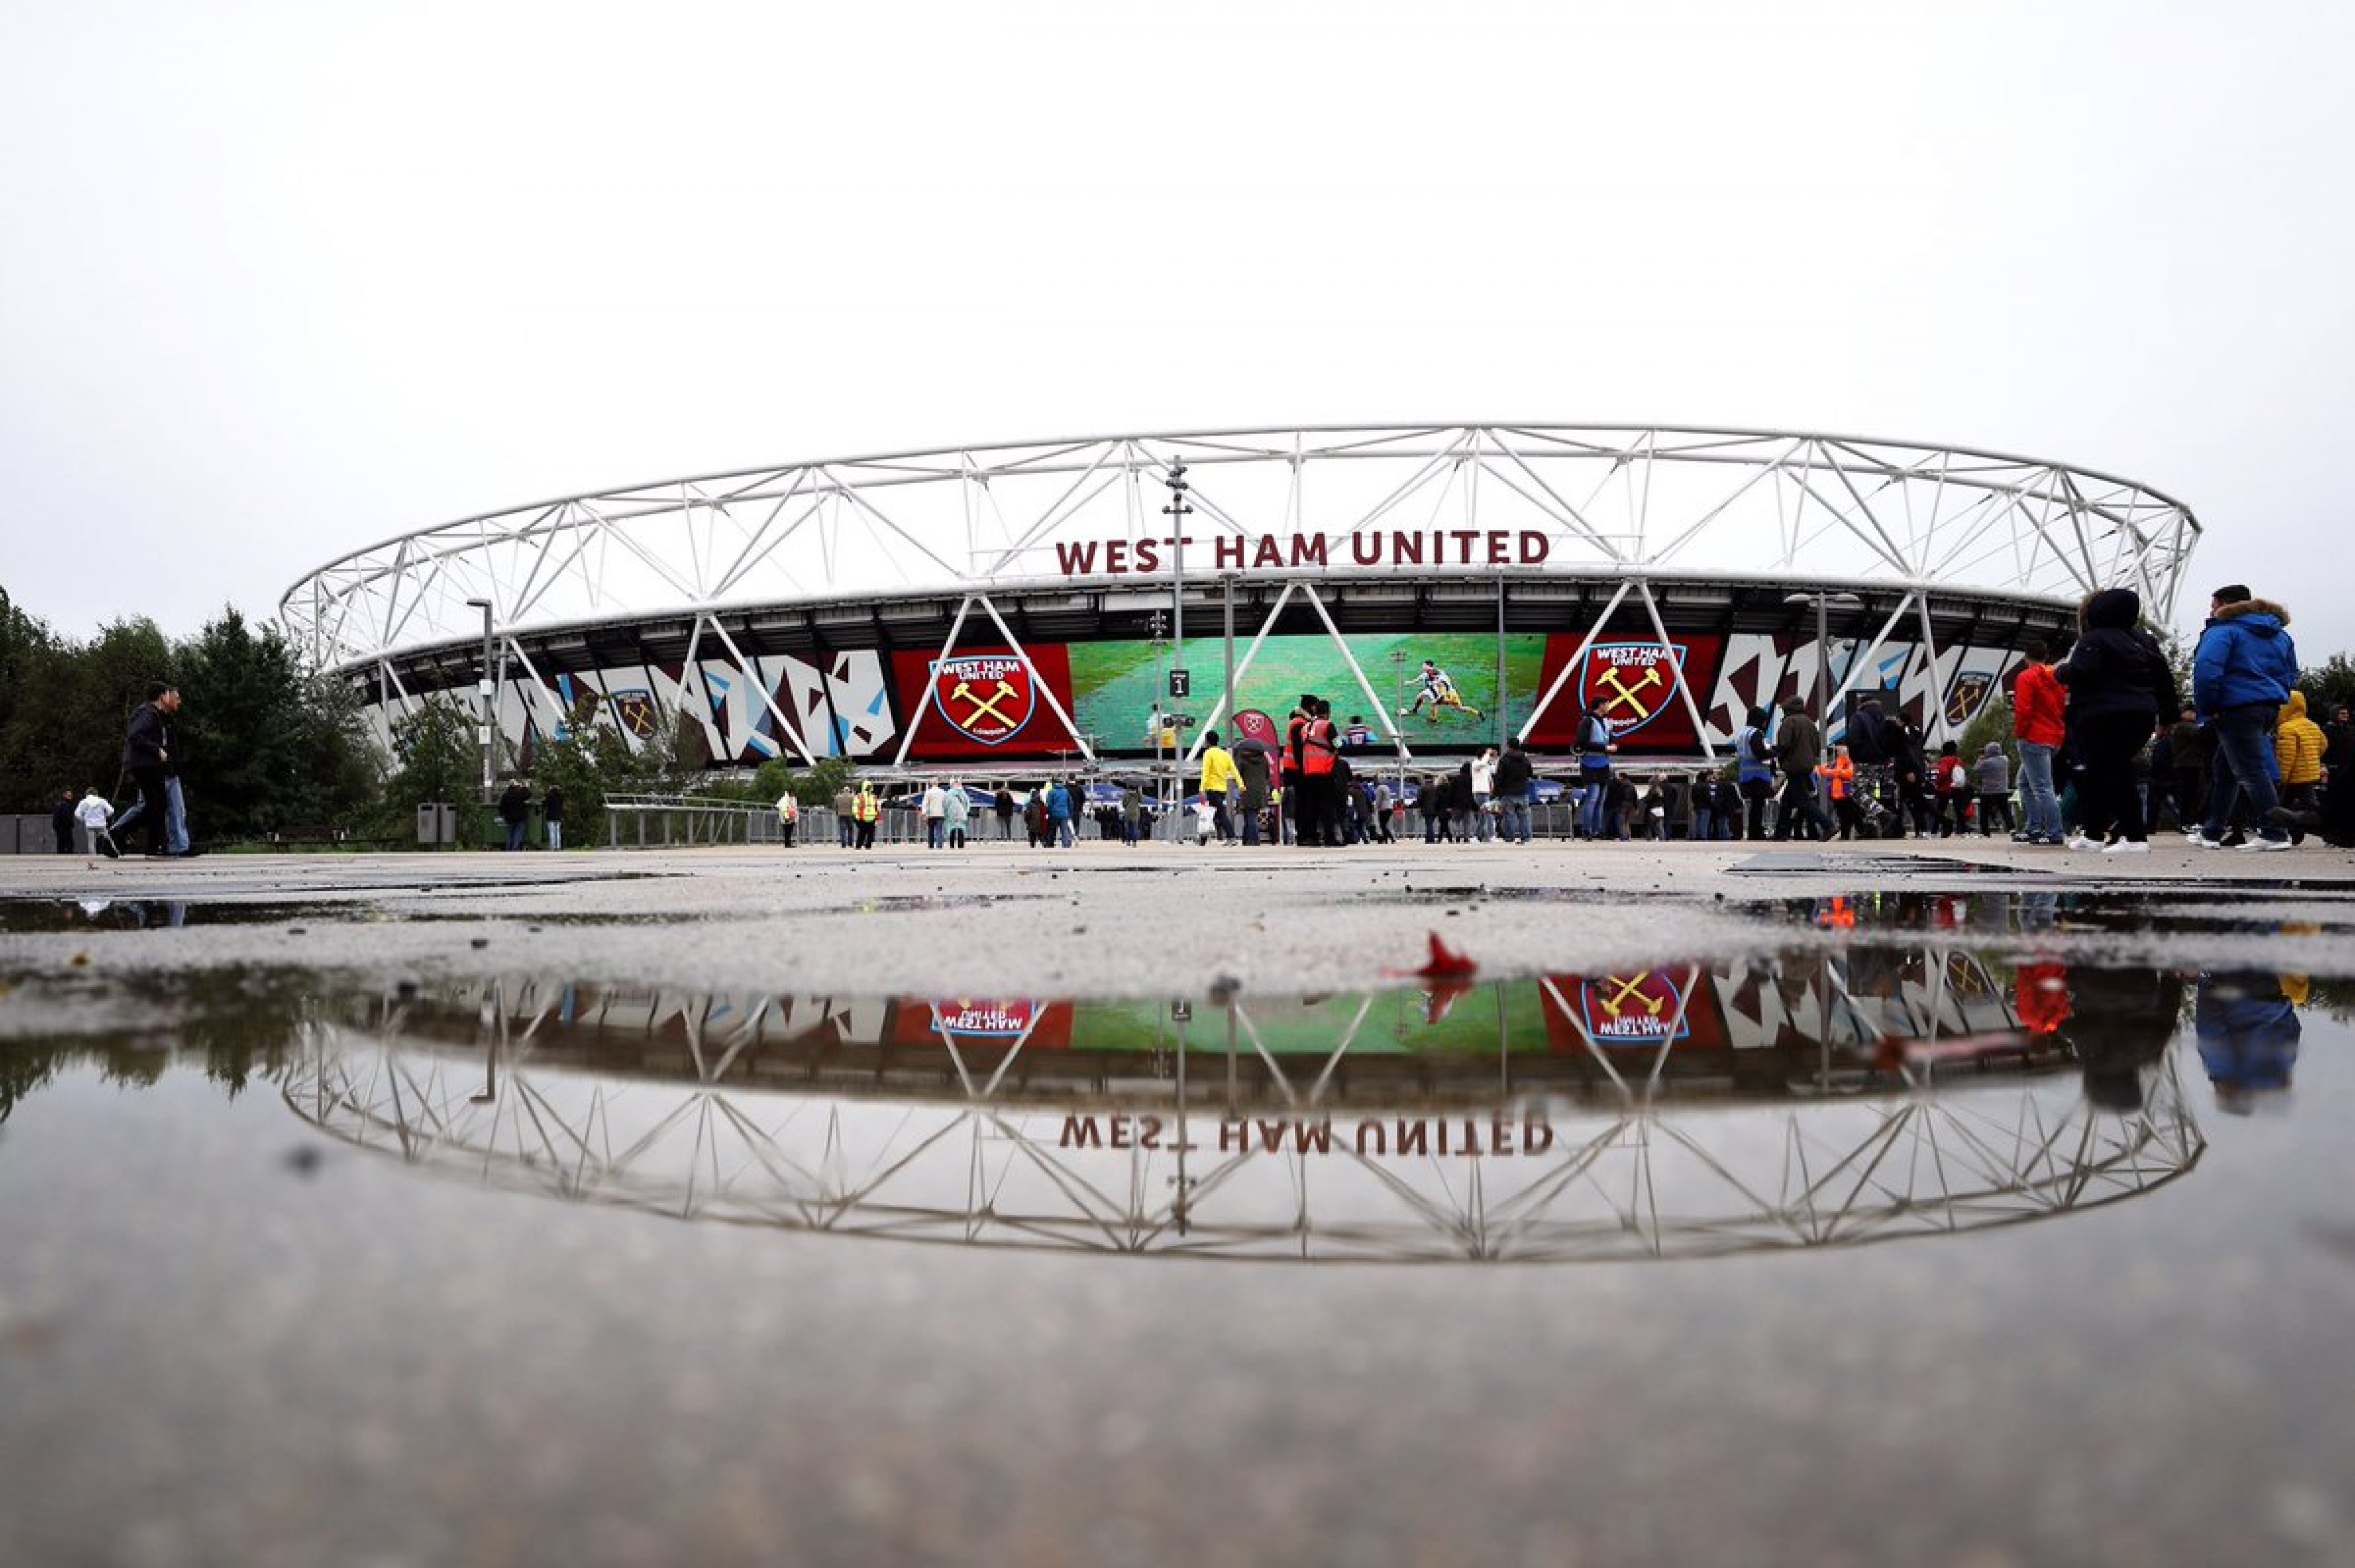 West Ham United 0-0 Chelsea: First clean sheet for the Hammers as Chelsea's unbeaten run continues